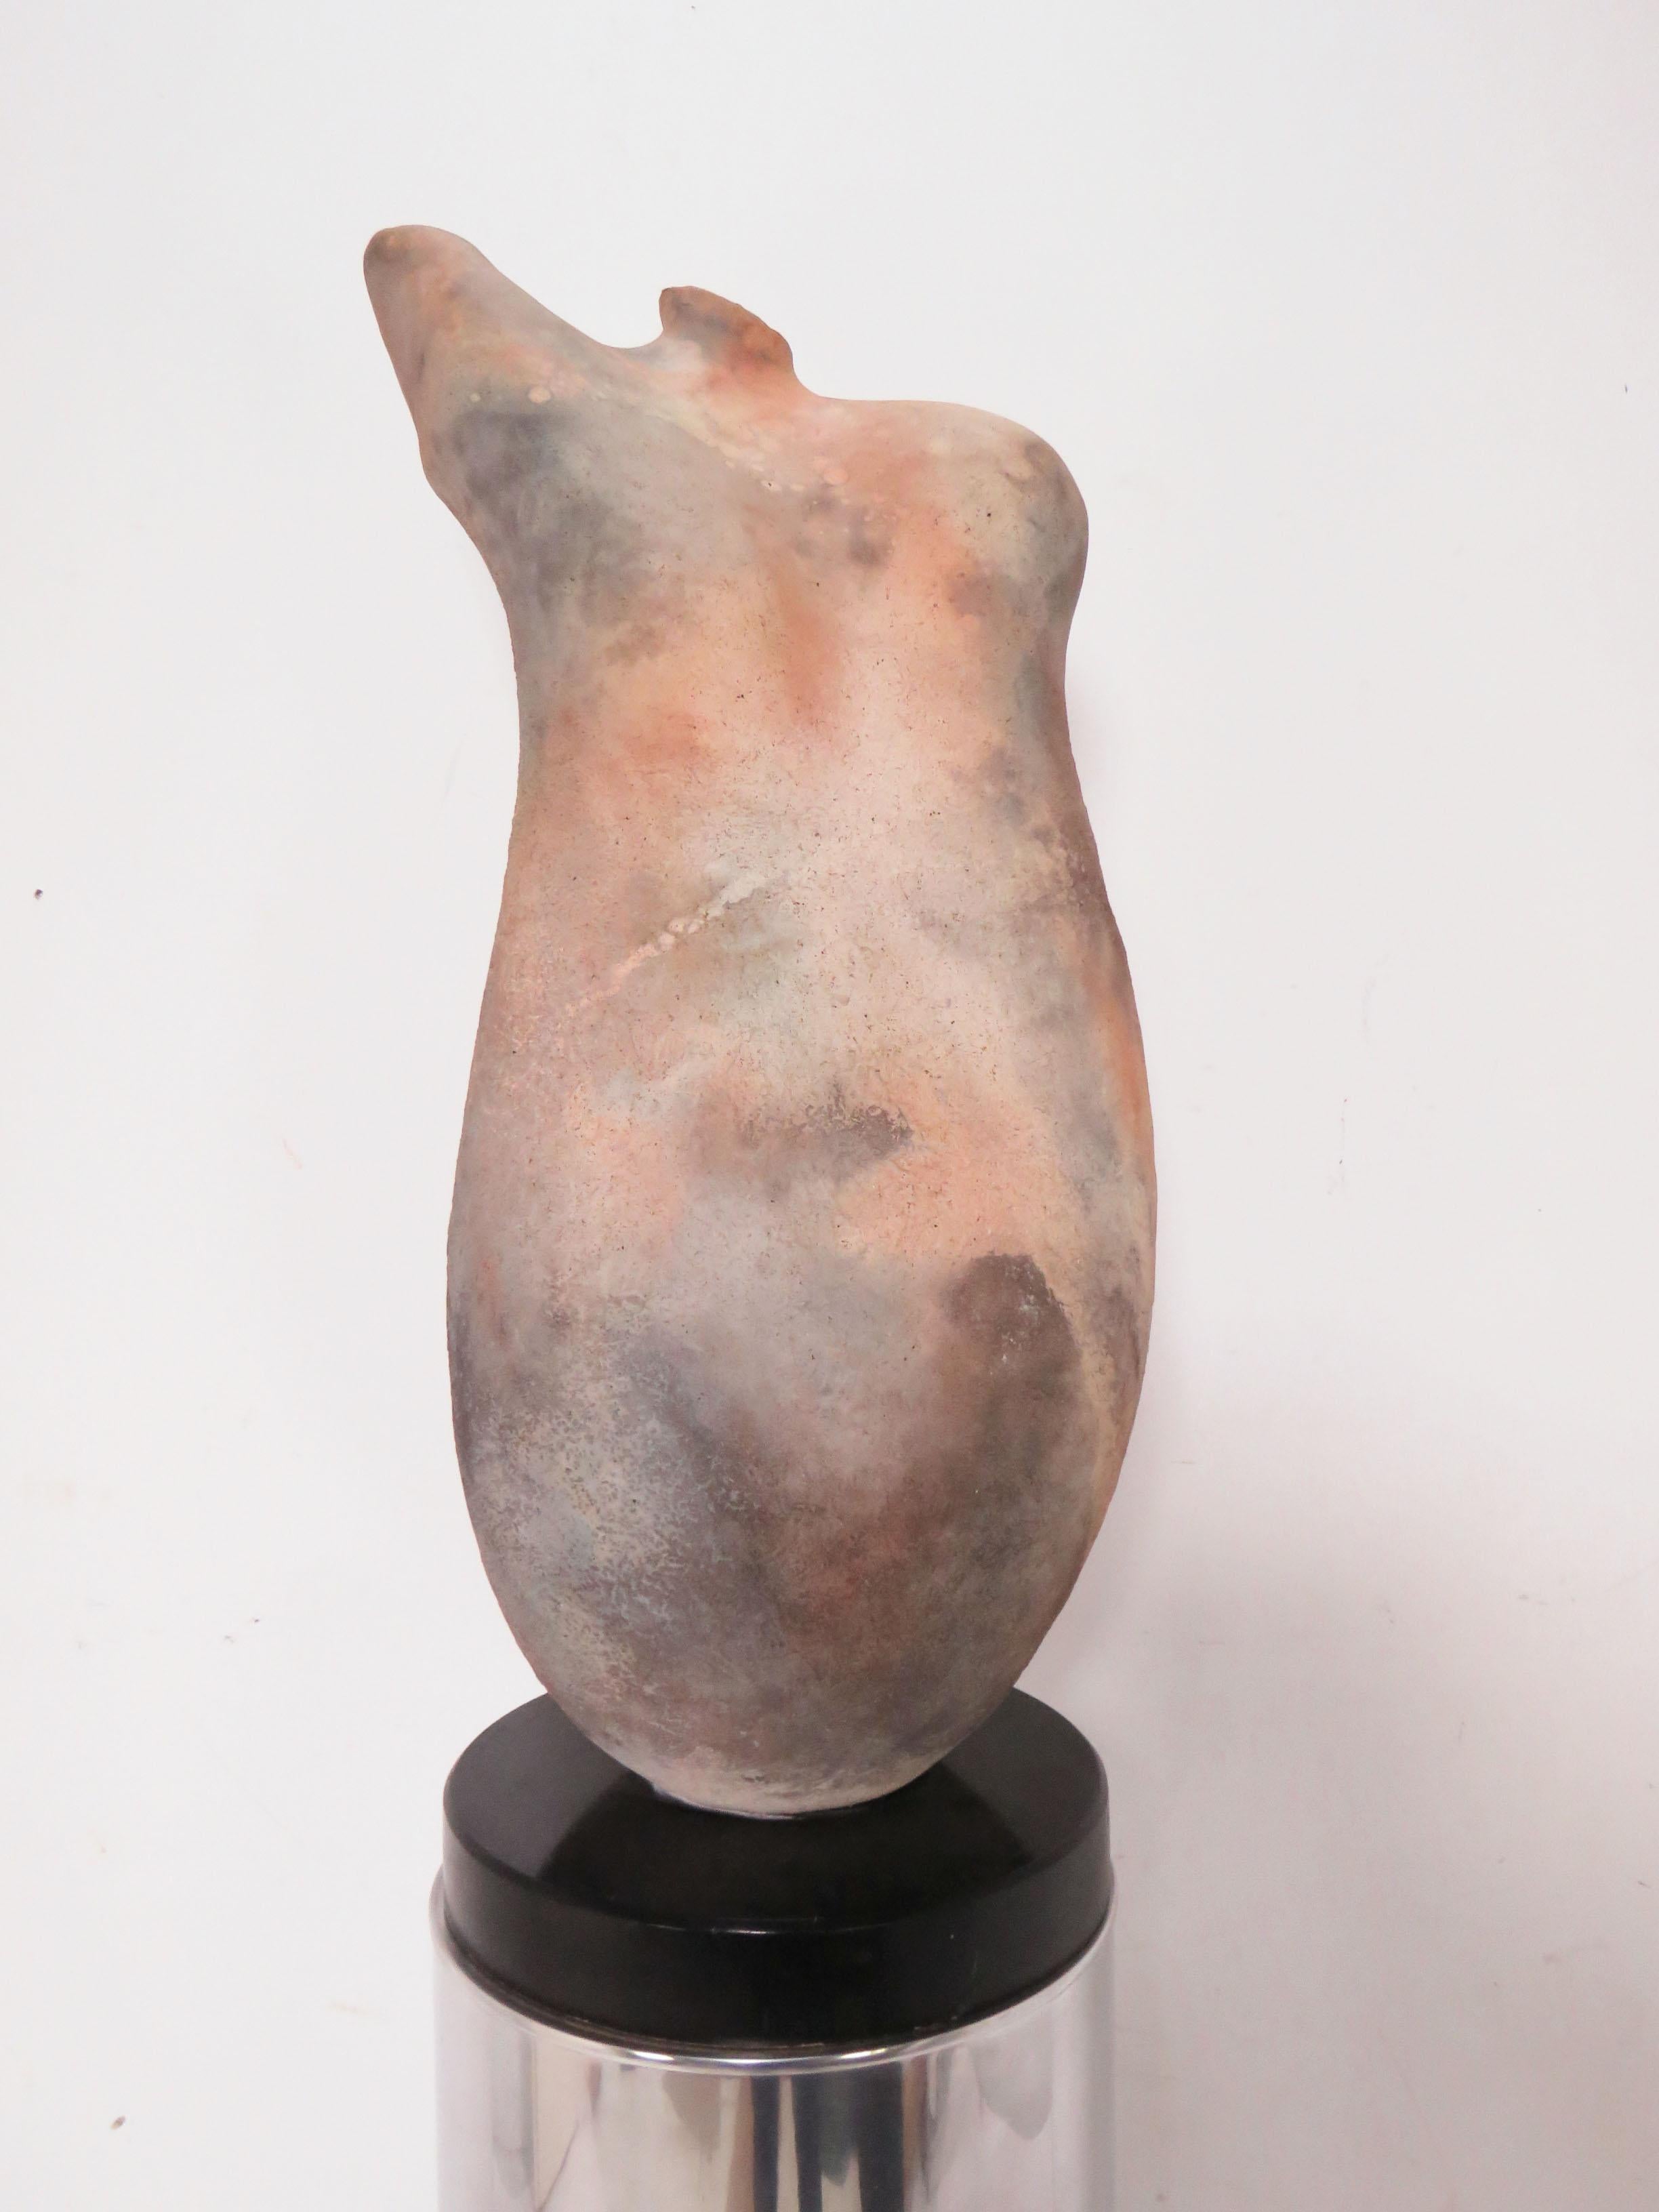 Raku abstract torso sculpture by master potter Tom Neugebauer, dated 1988. Sculpture (which is affixed to lacquered black base) measures: 28.75